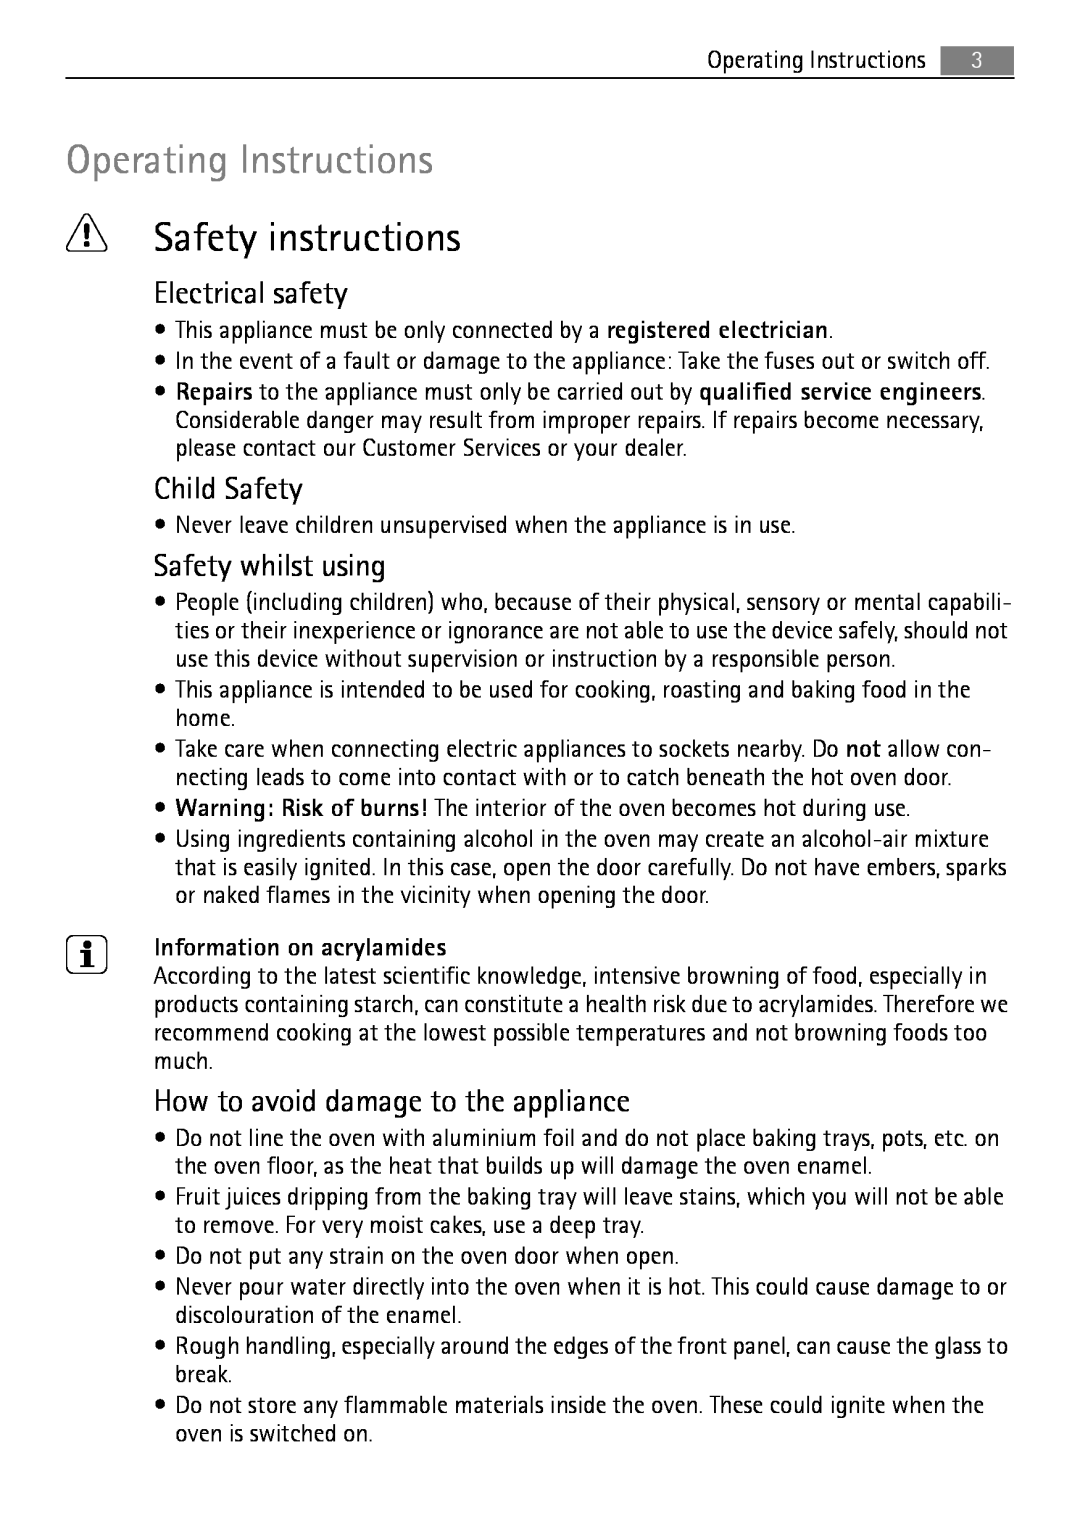 Electrolux B3741-5 Operating Instructions, Safety instructions, Electrical safety, Child Safety, Safety whilst using 